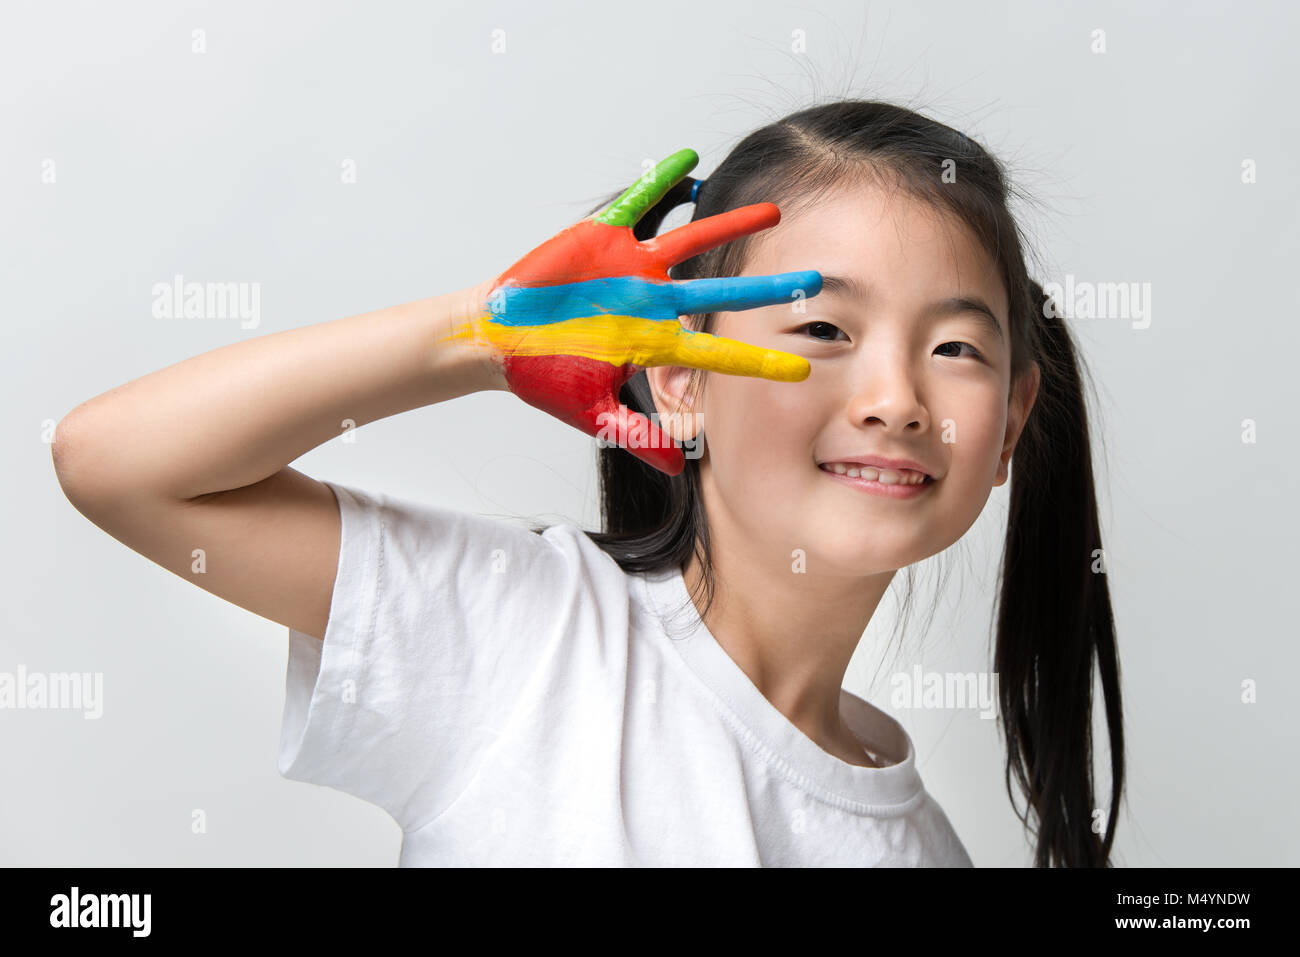 Little Asian girl with hands painted in colorful paints Stock Photo